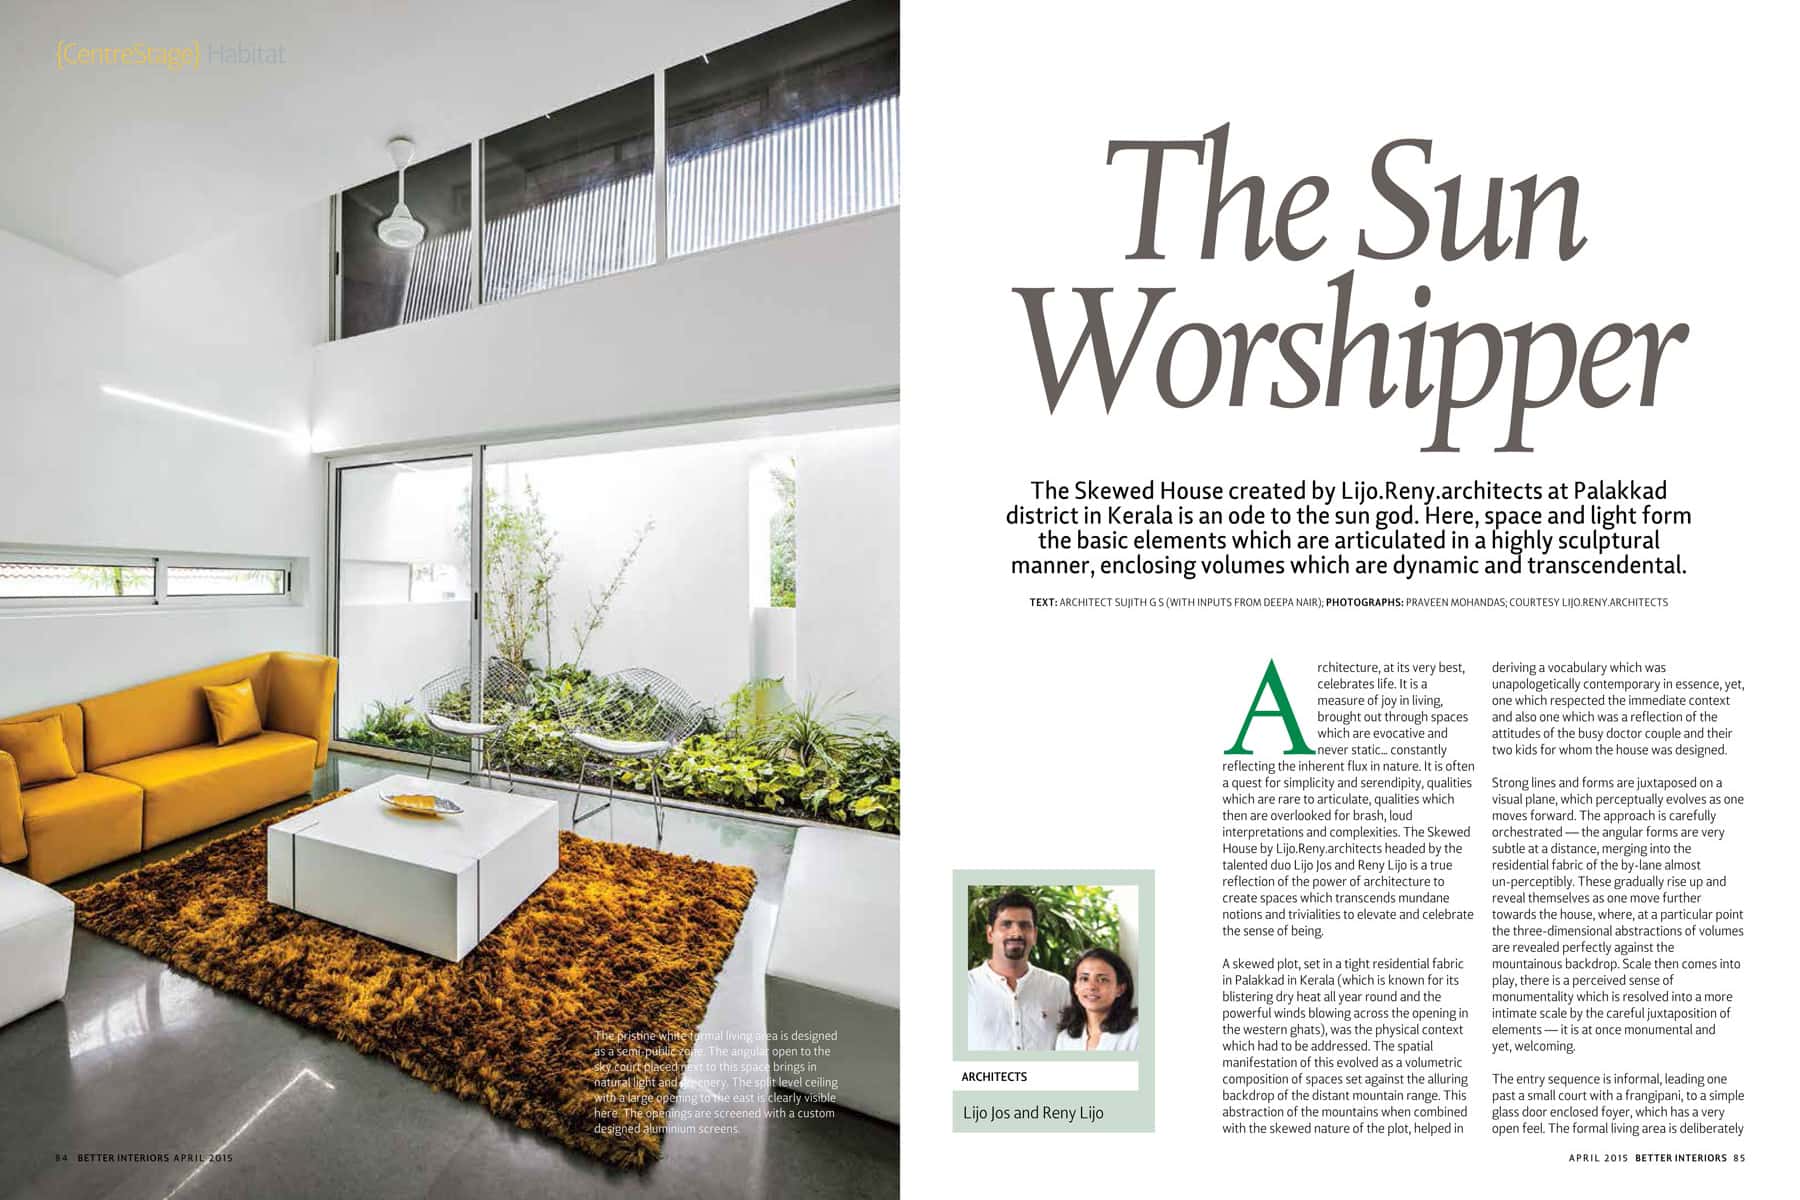 better-interiors-magazine-india-published-a-cover-story-on-the-skewed-house-2